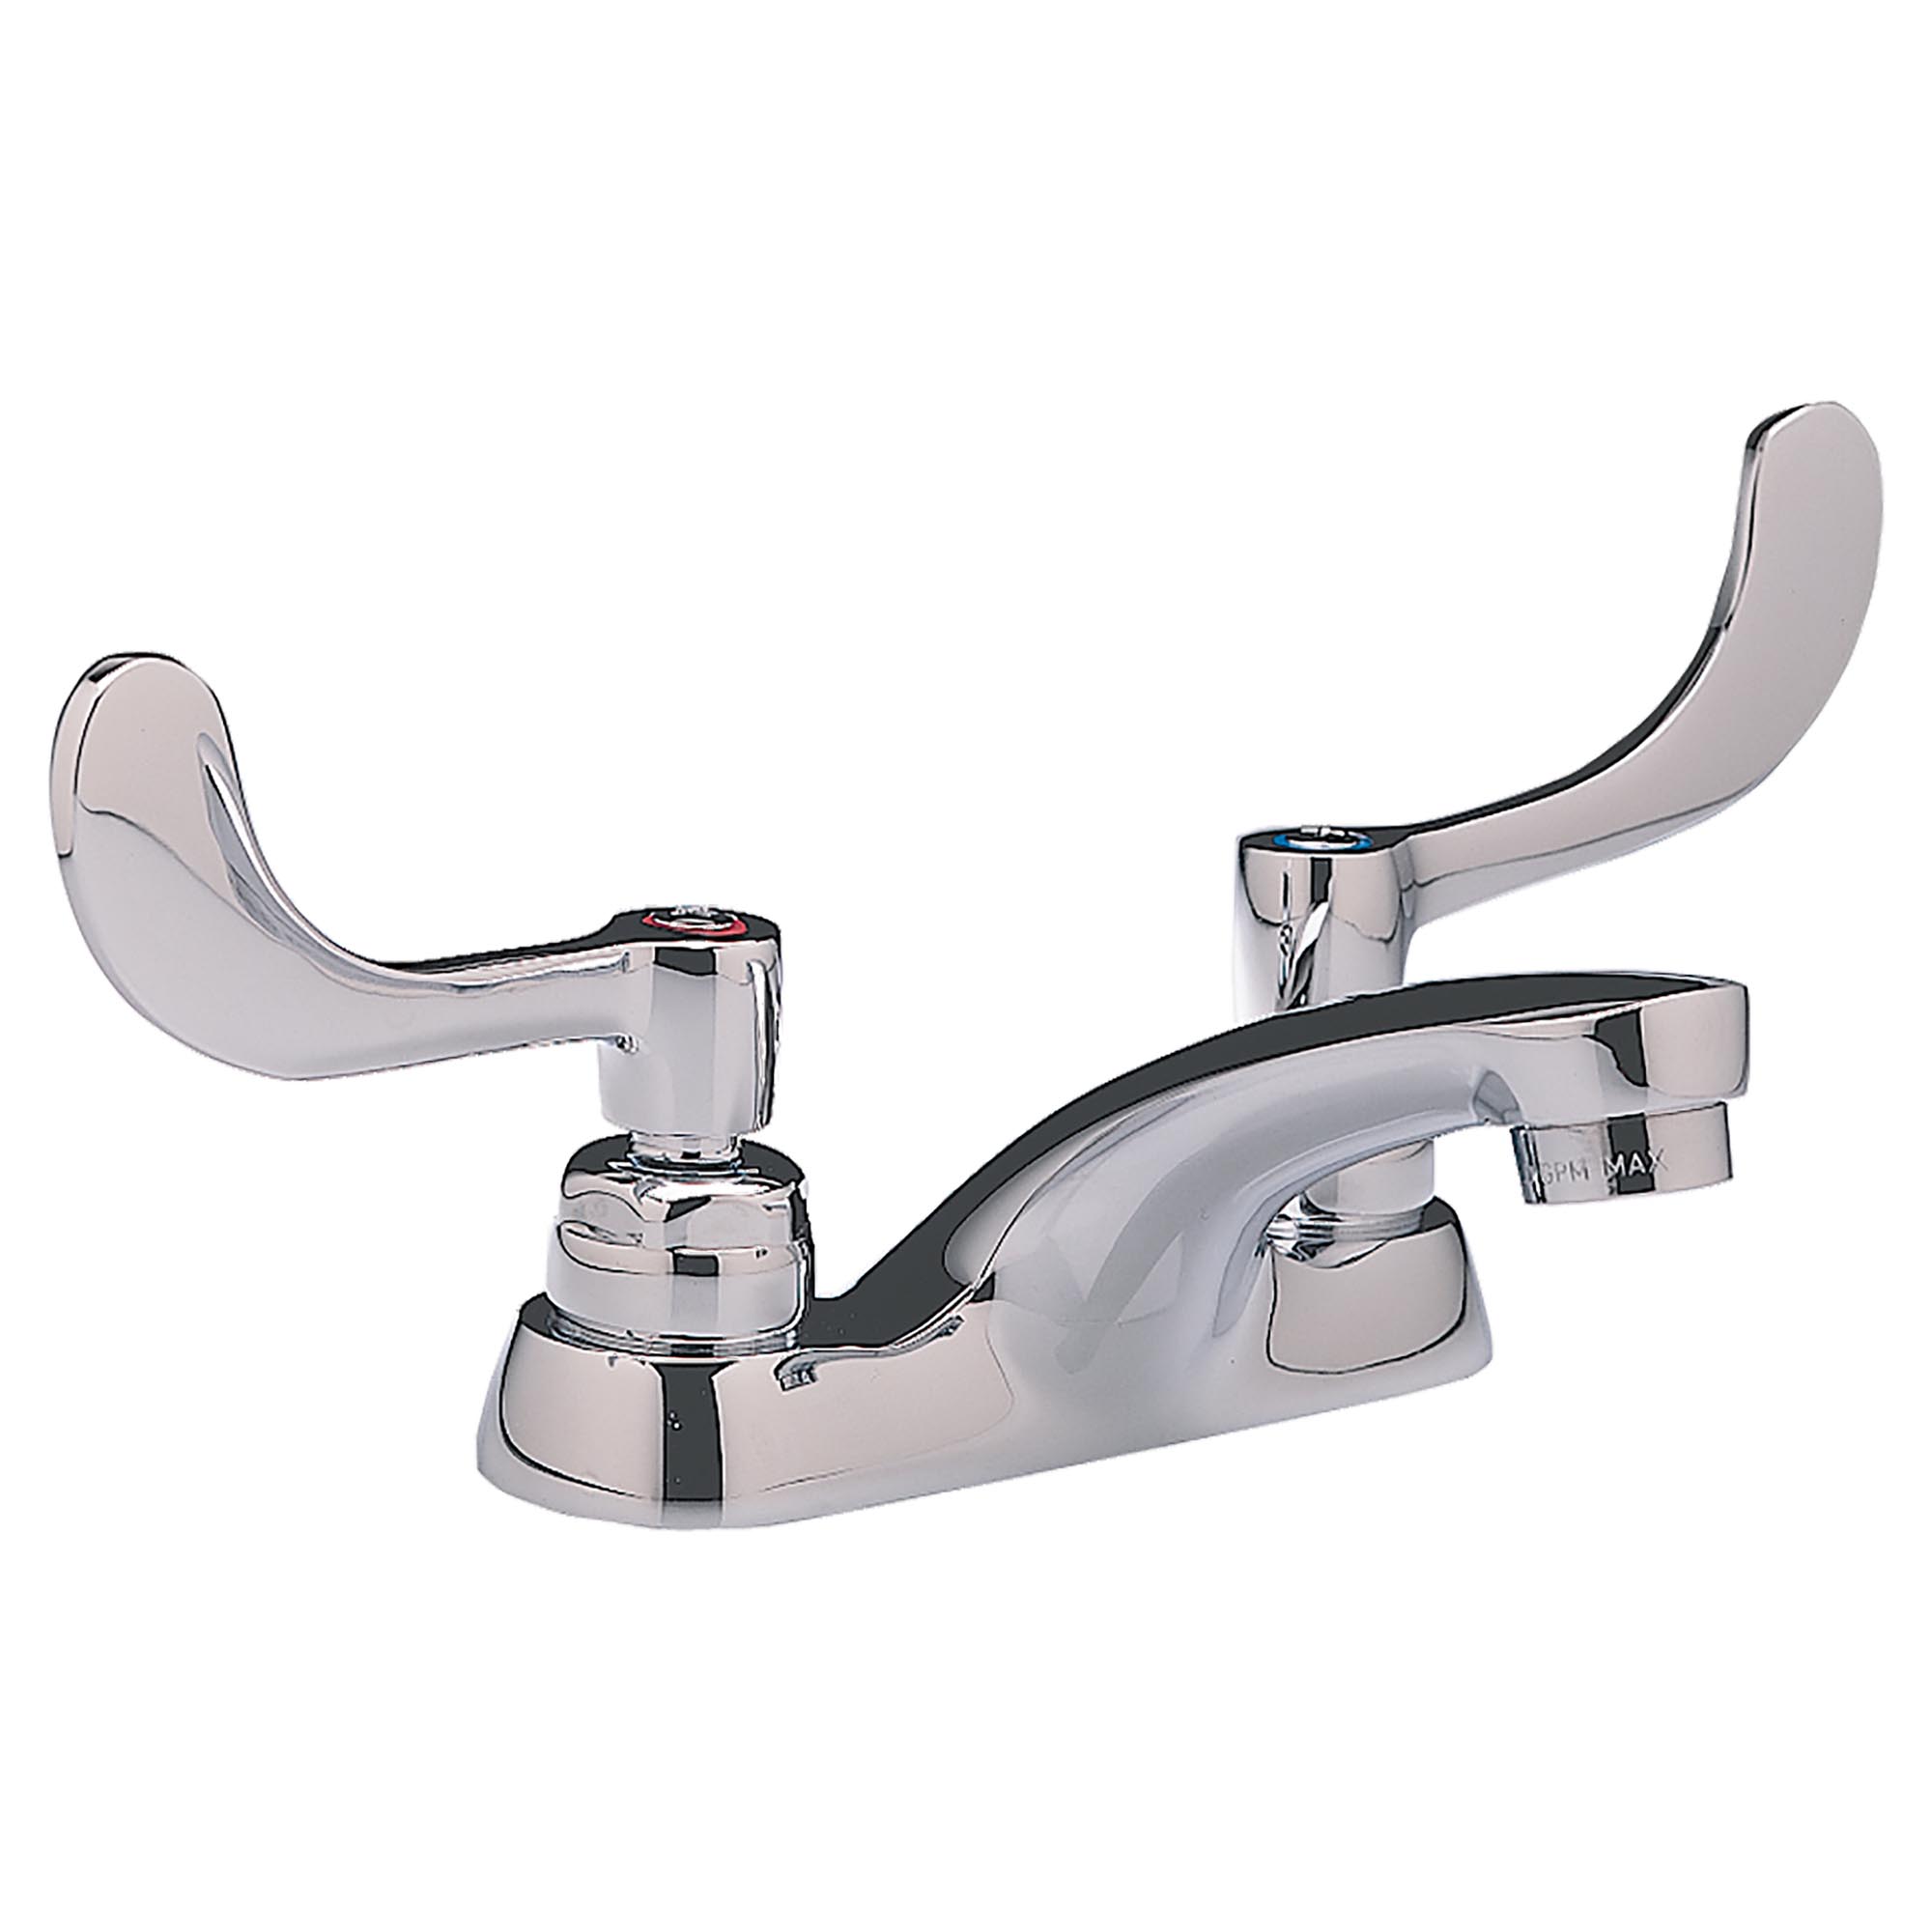 Monterrey™ 4-Inch Centerset Cast Faucet With Wrist Blade Handles 0.5 gpm/1.9 Lpm With Grid Drain